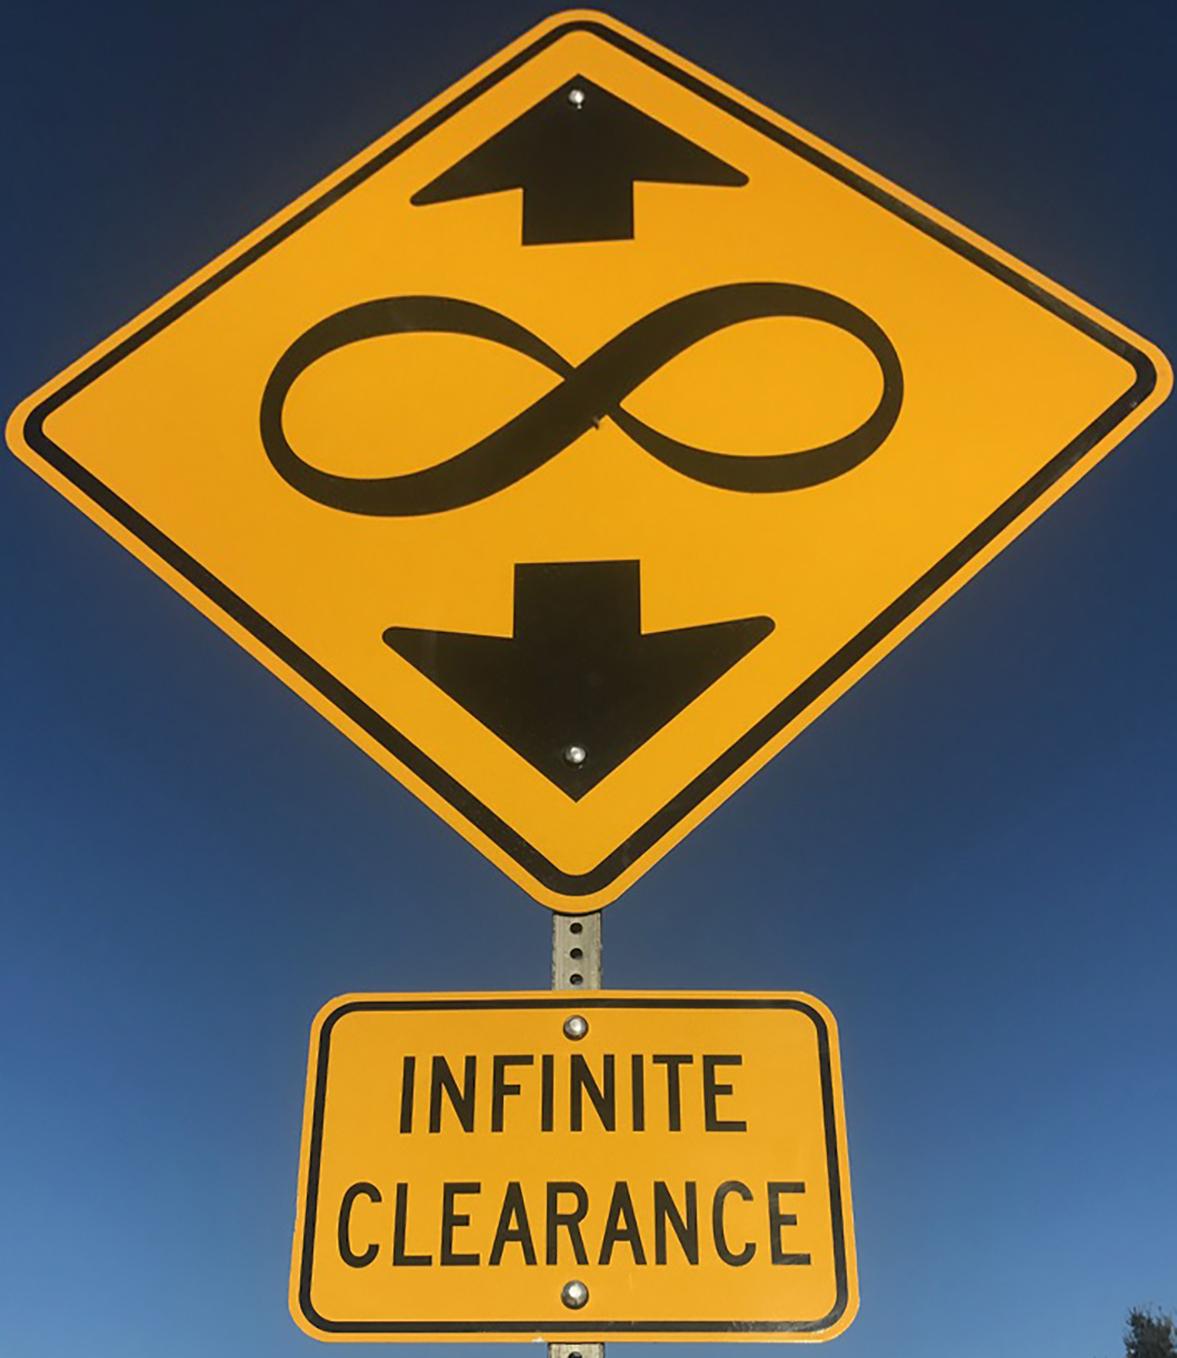 "Infinite Clearance" - Contemporary Street Sign Sculpture